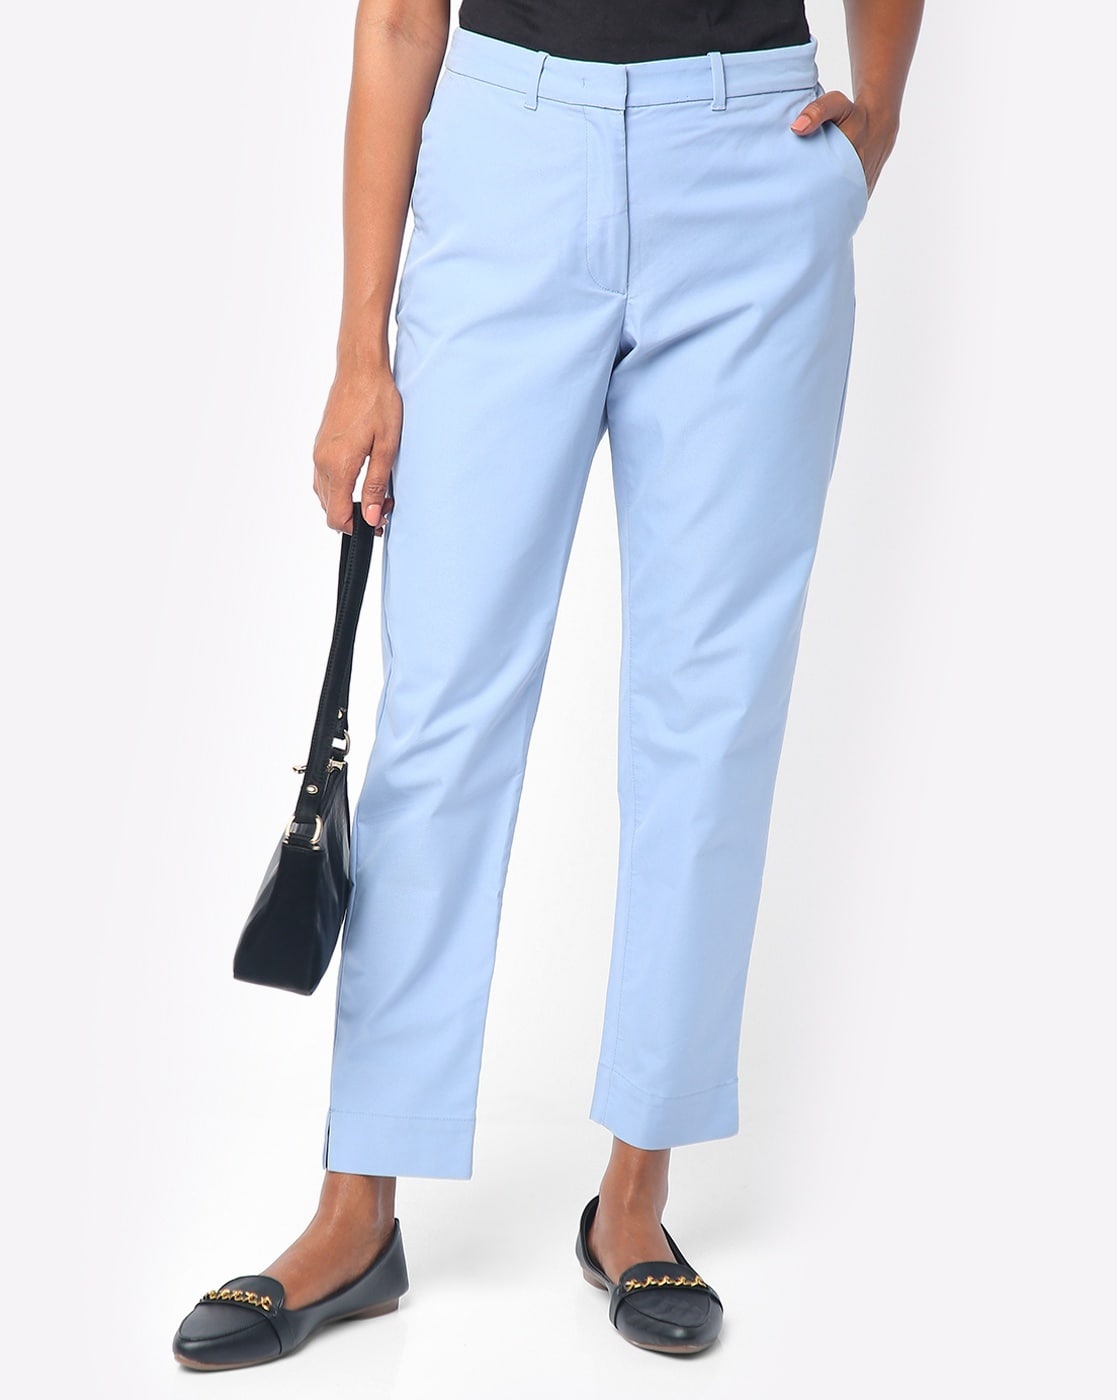 The 1750 MS trousers youll wear on repeat